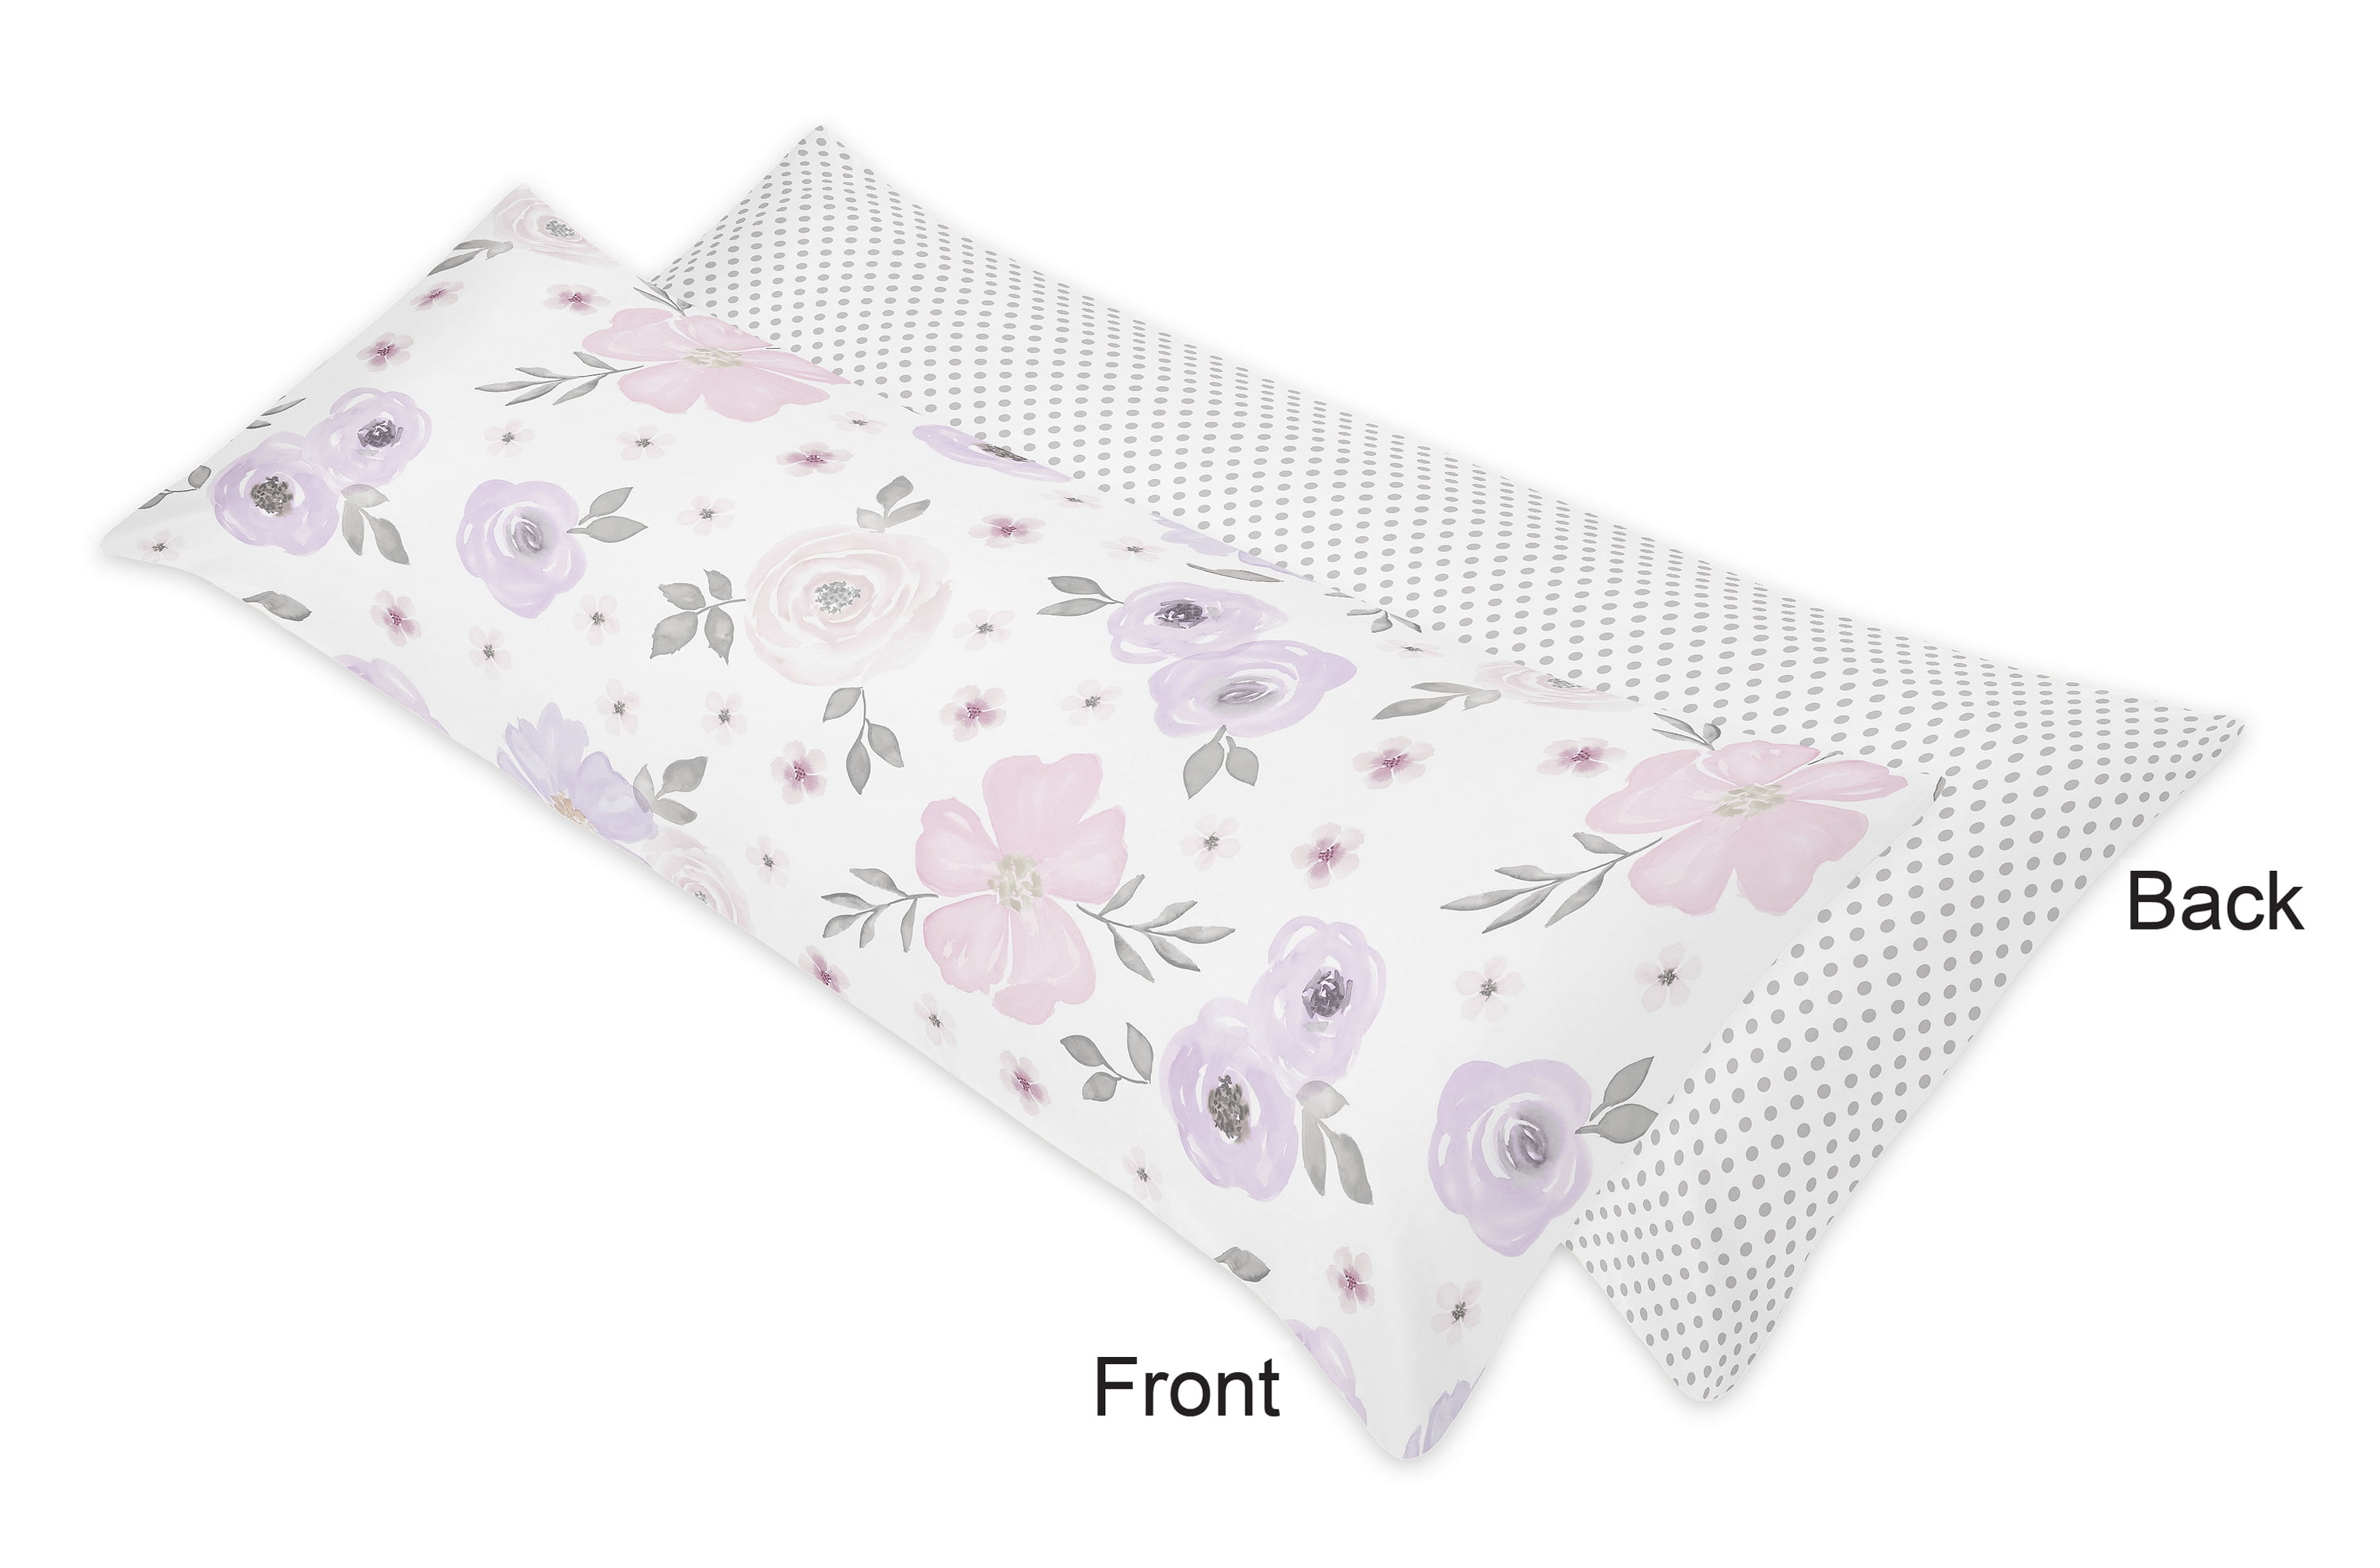 Polka Dot Lavender Purple Pink Grey Watercolor Floral Body Pillow Case Cover